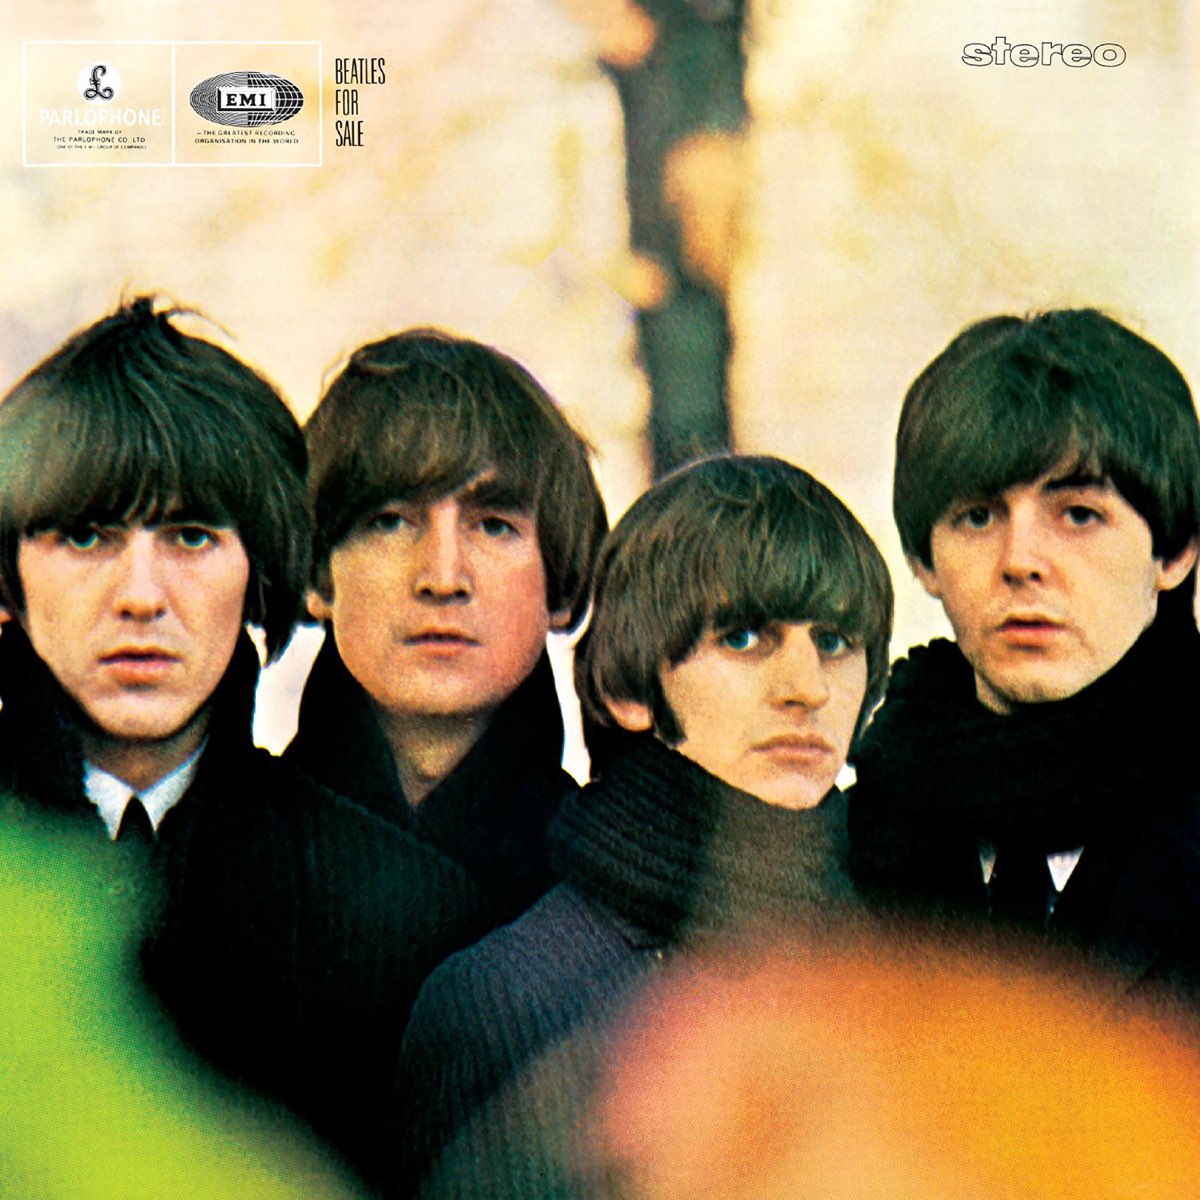 The Beatles — Beatles for Sale cover artwork